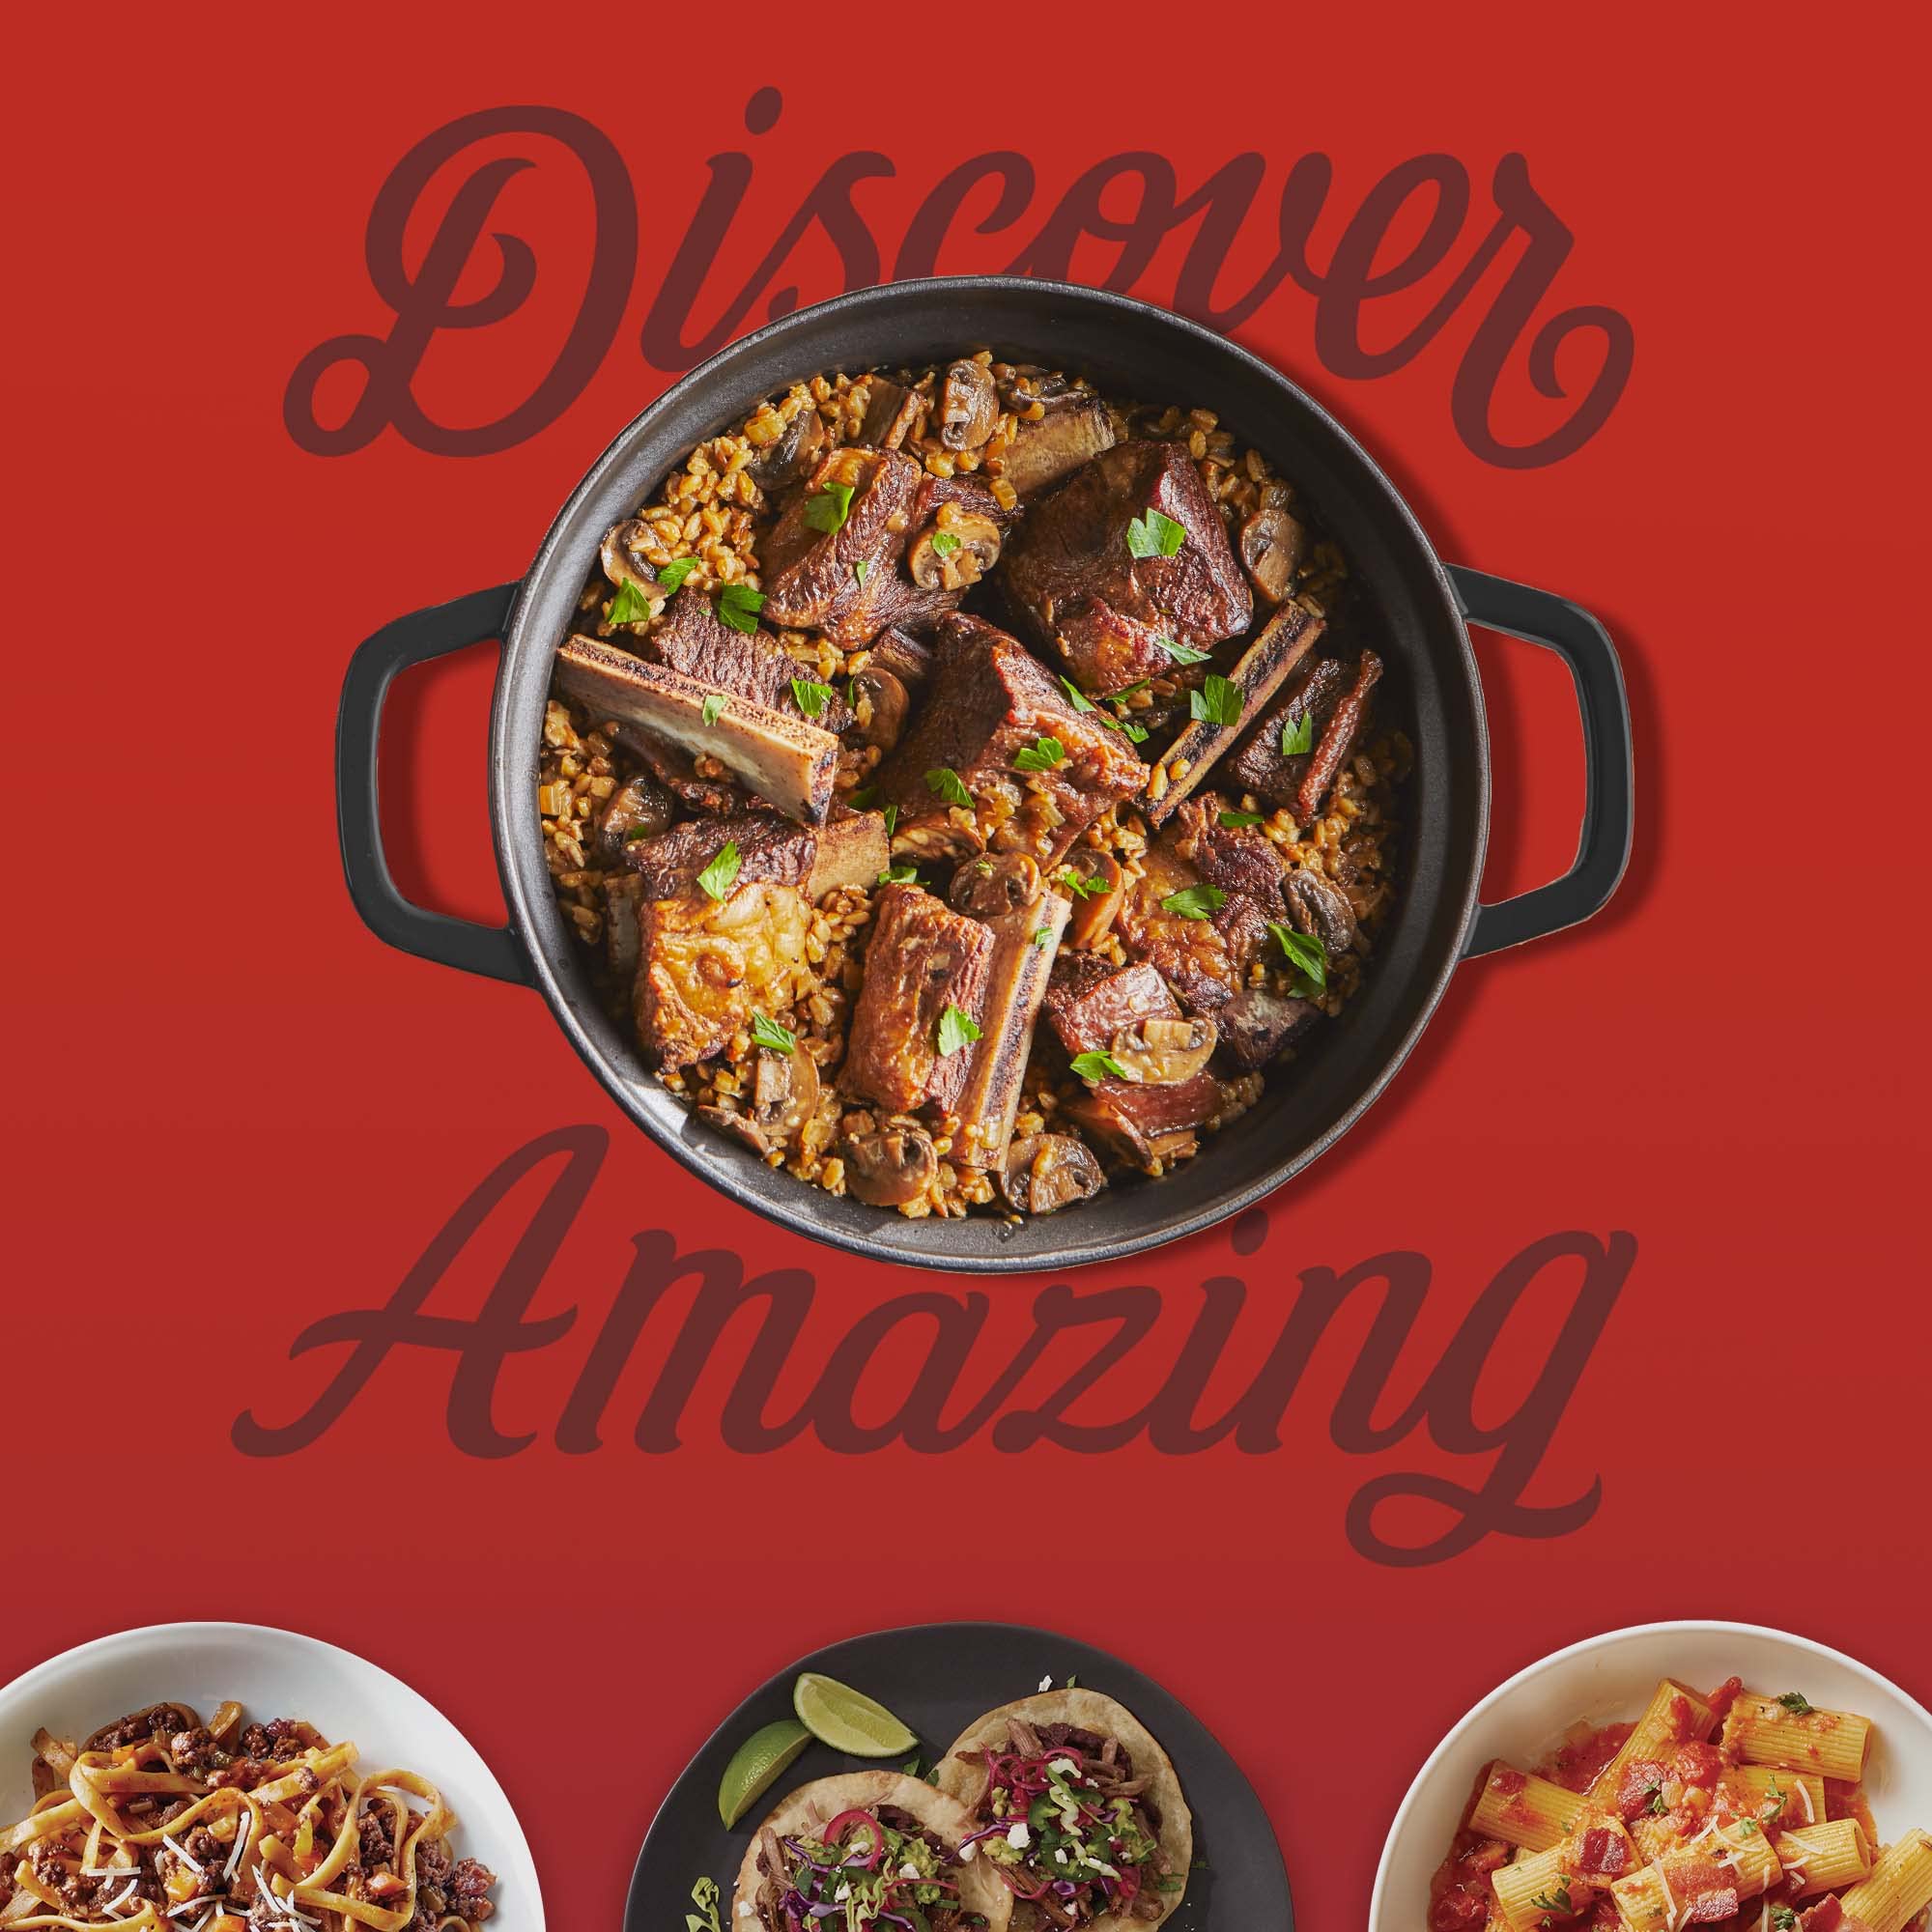 Instant Electric Round Dutch Oven, 6-Quart 1500W, From the Makers of Instant Pot, 5-in-1: Braise, Slow Cook, Sear/Sauté, Cooking Pan, Food Warmer, Enameled Cast Iron, Included Recipe Book, Black